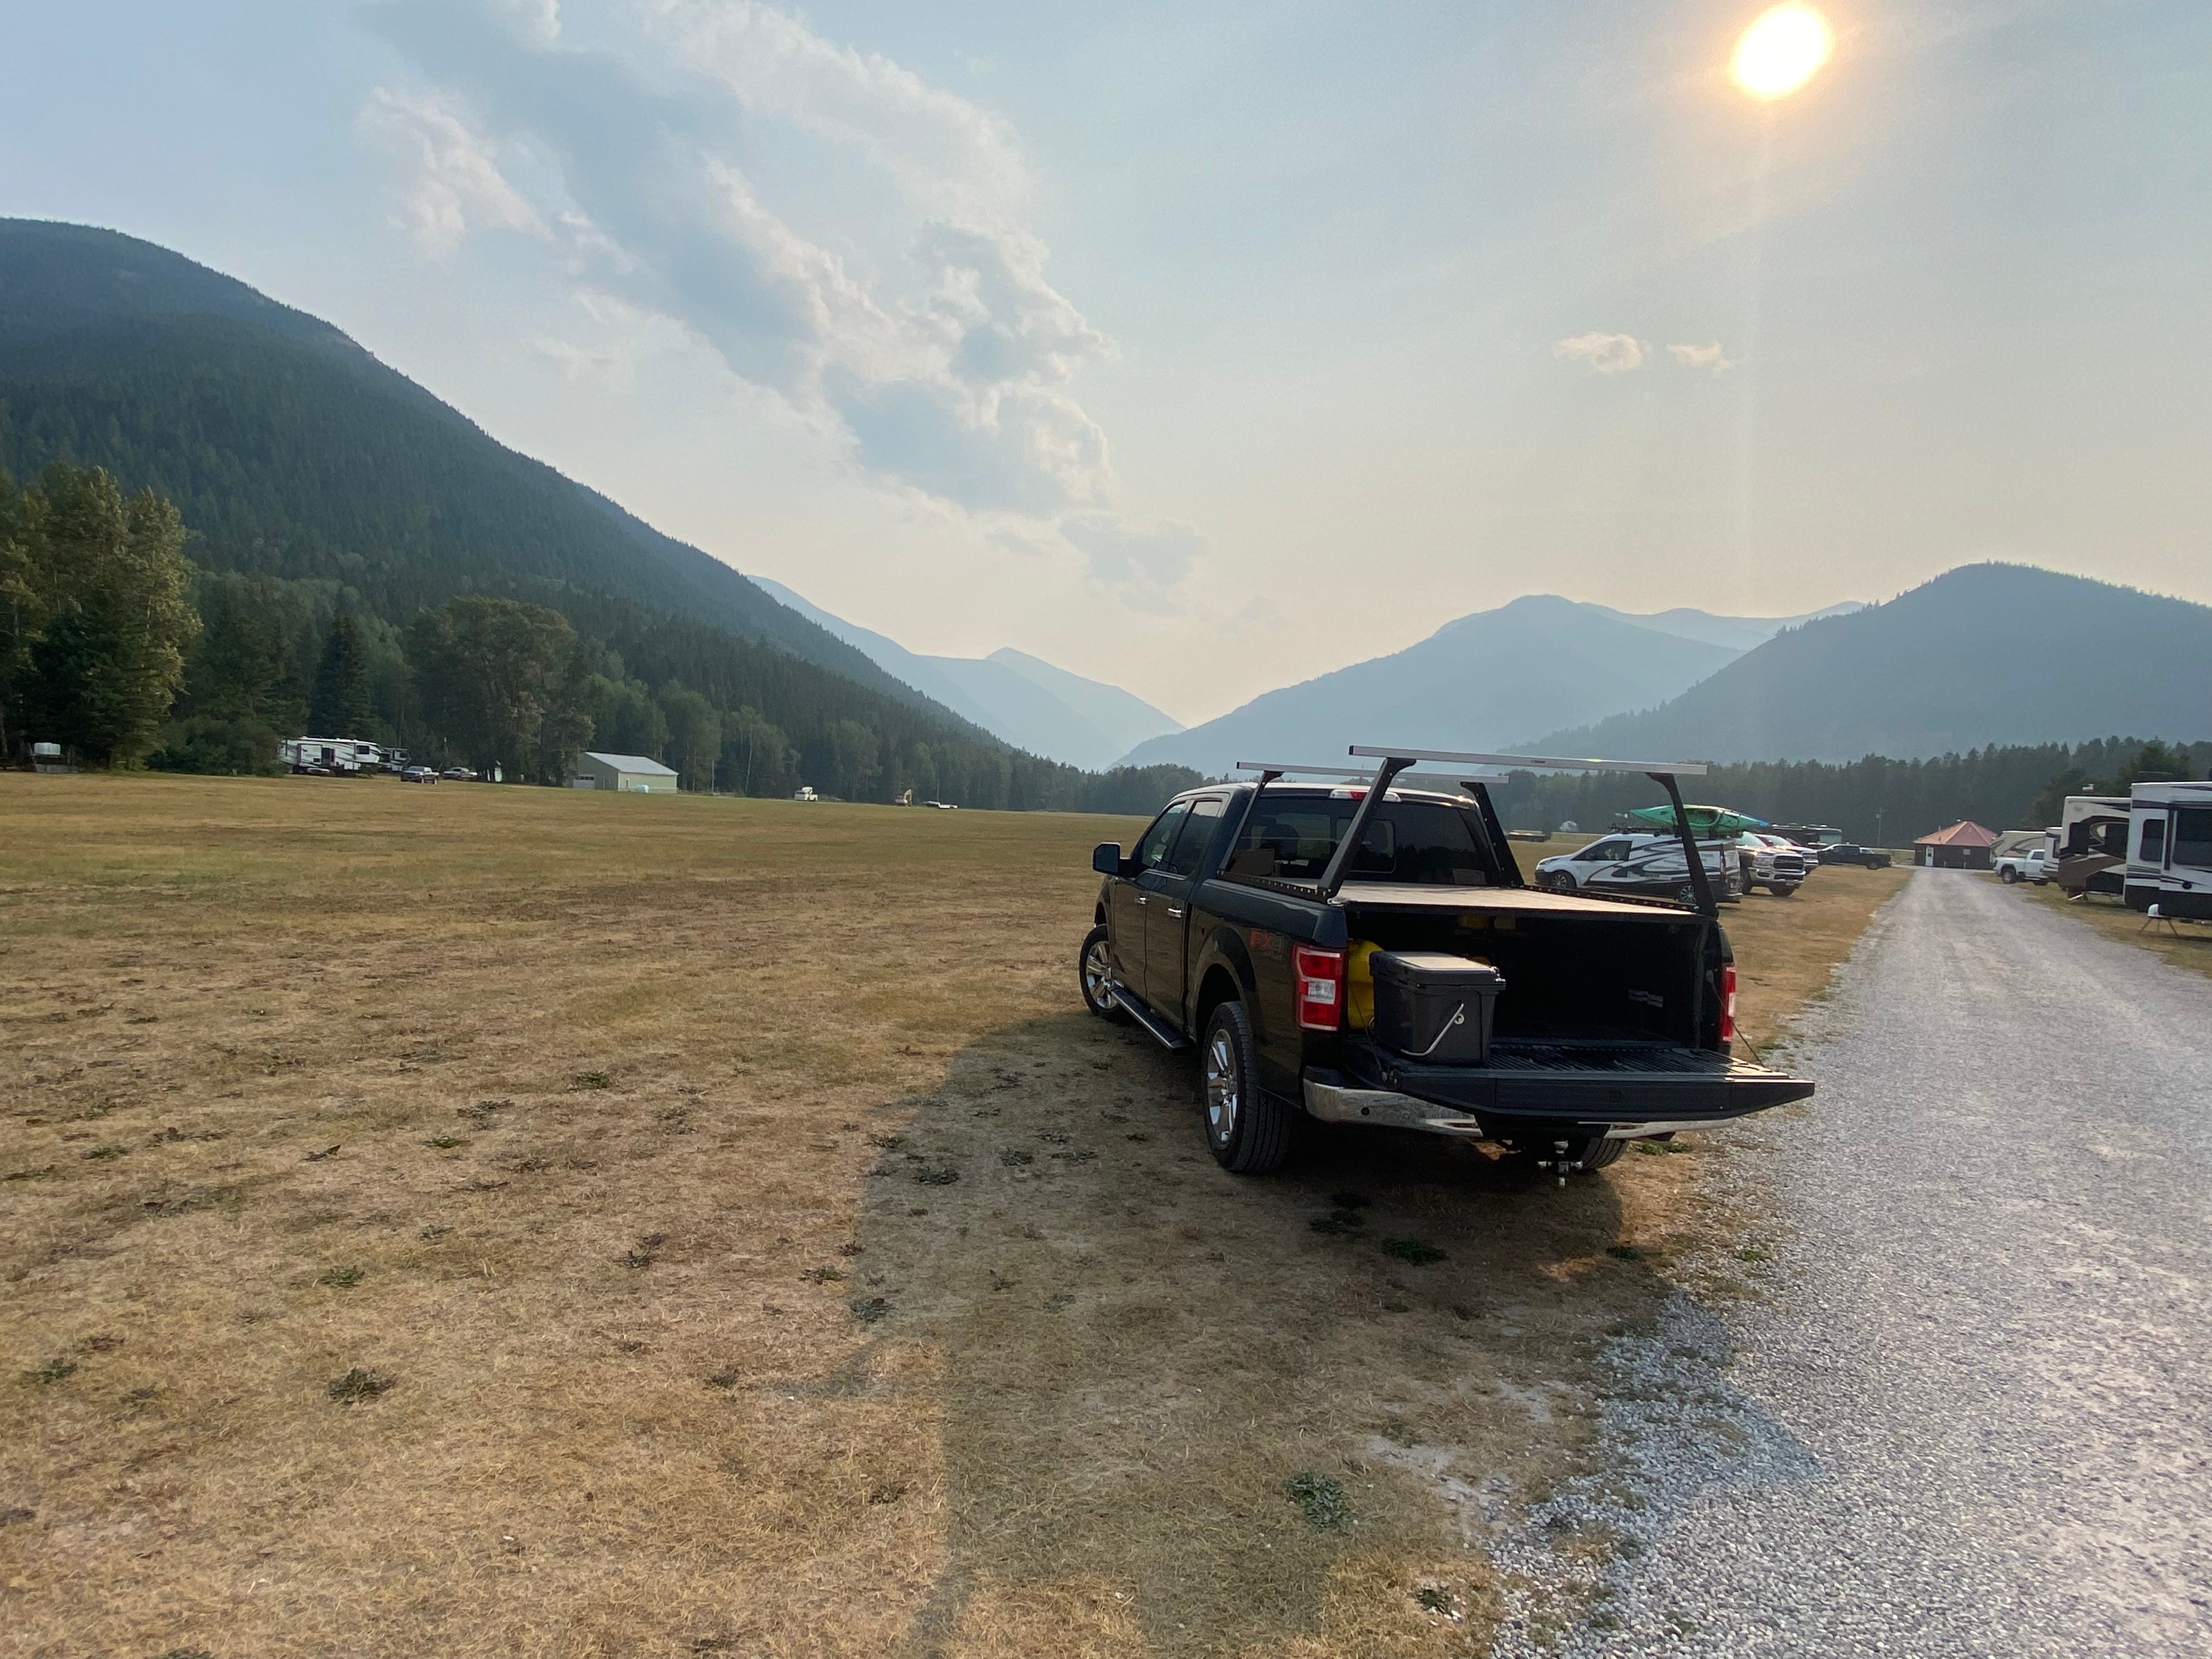 Camper submitted image from Glacier Meadow RV Park - 3